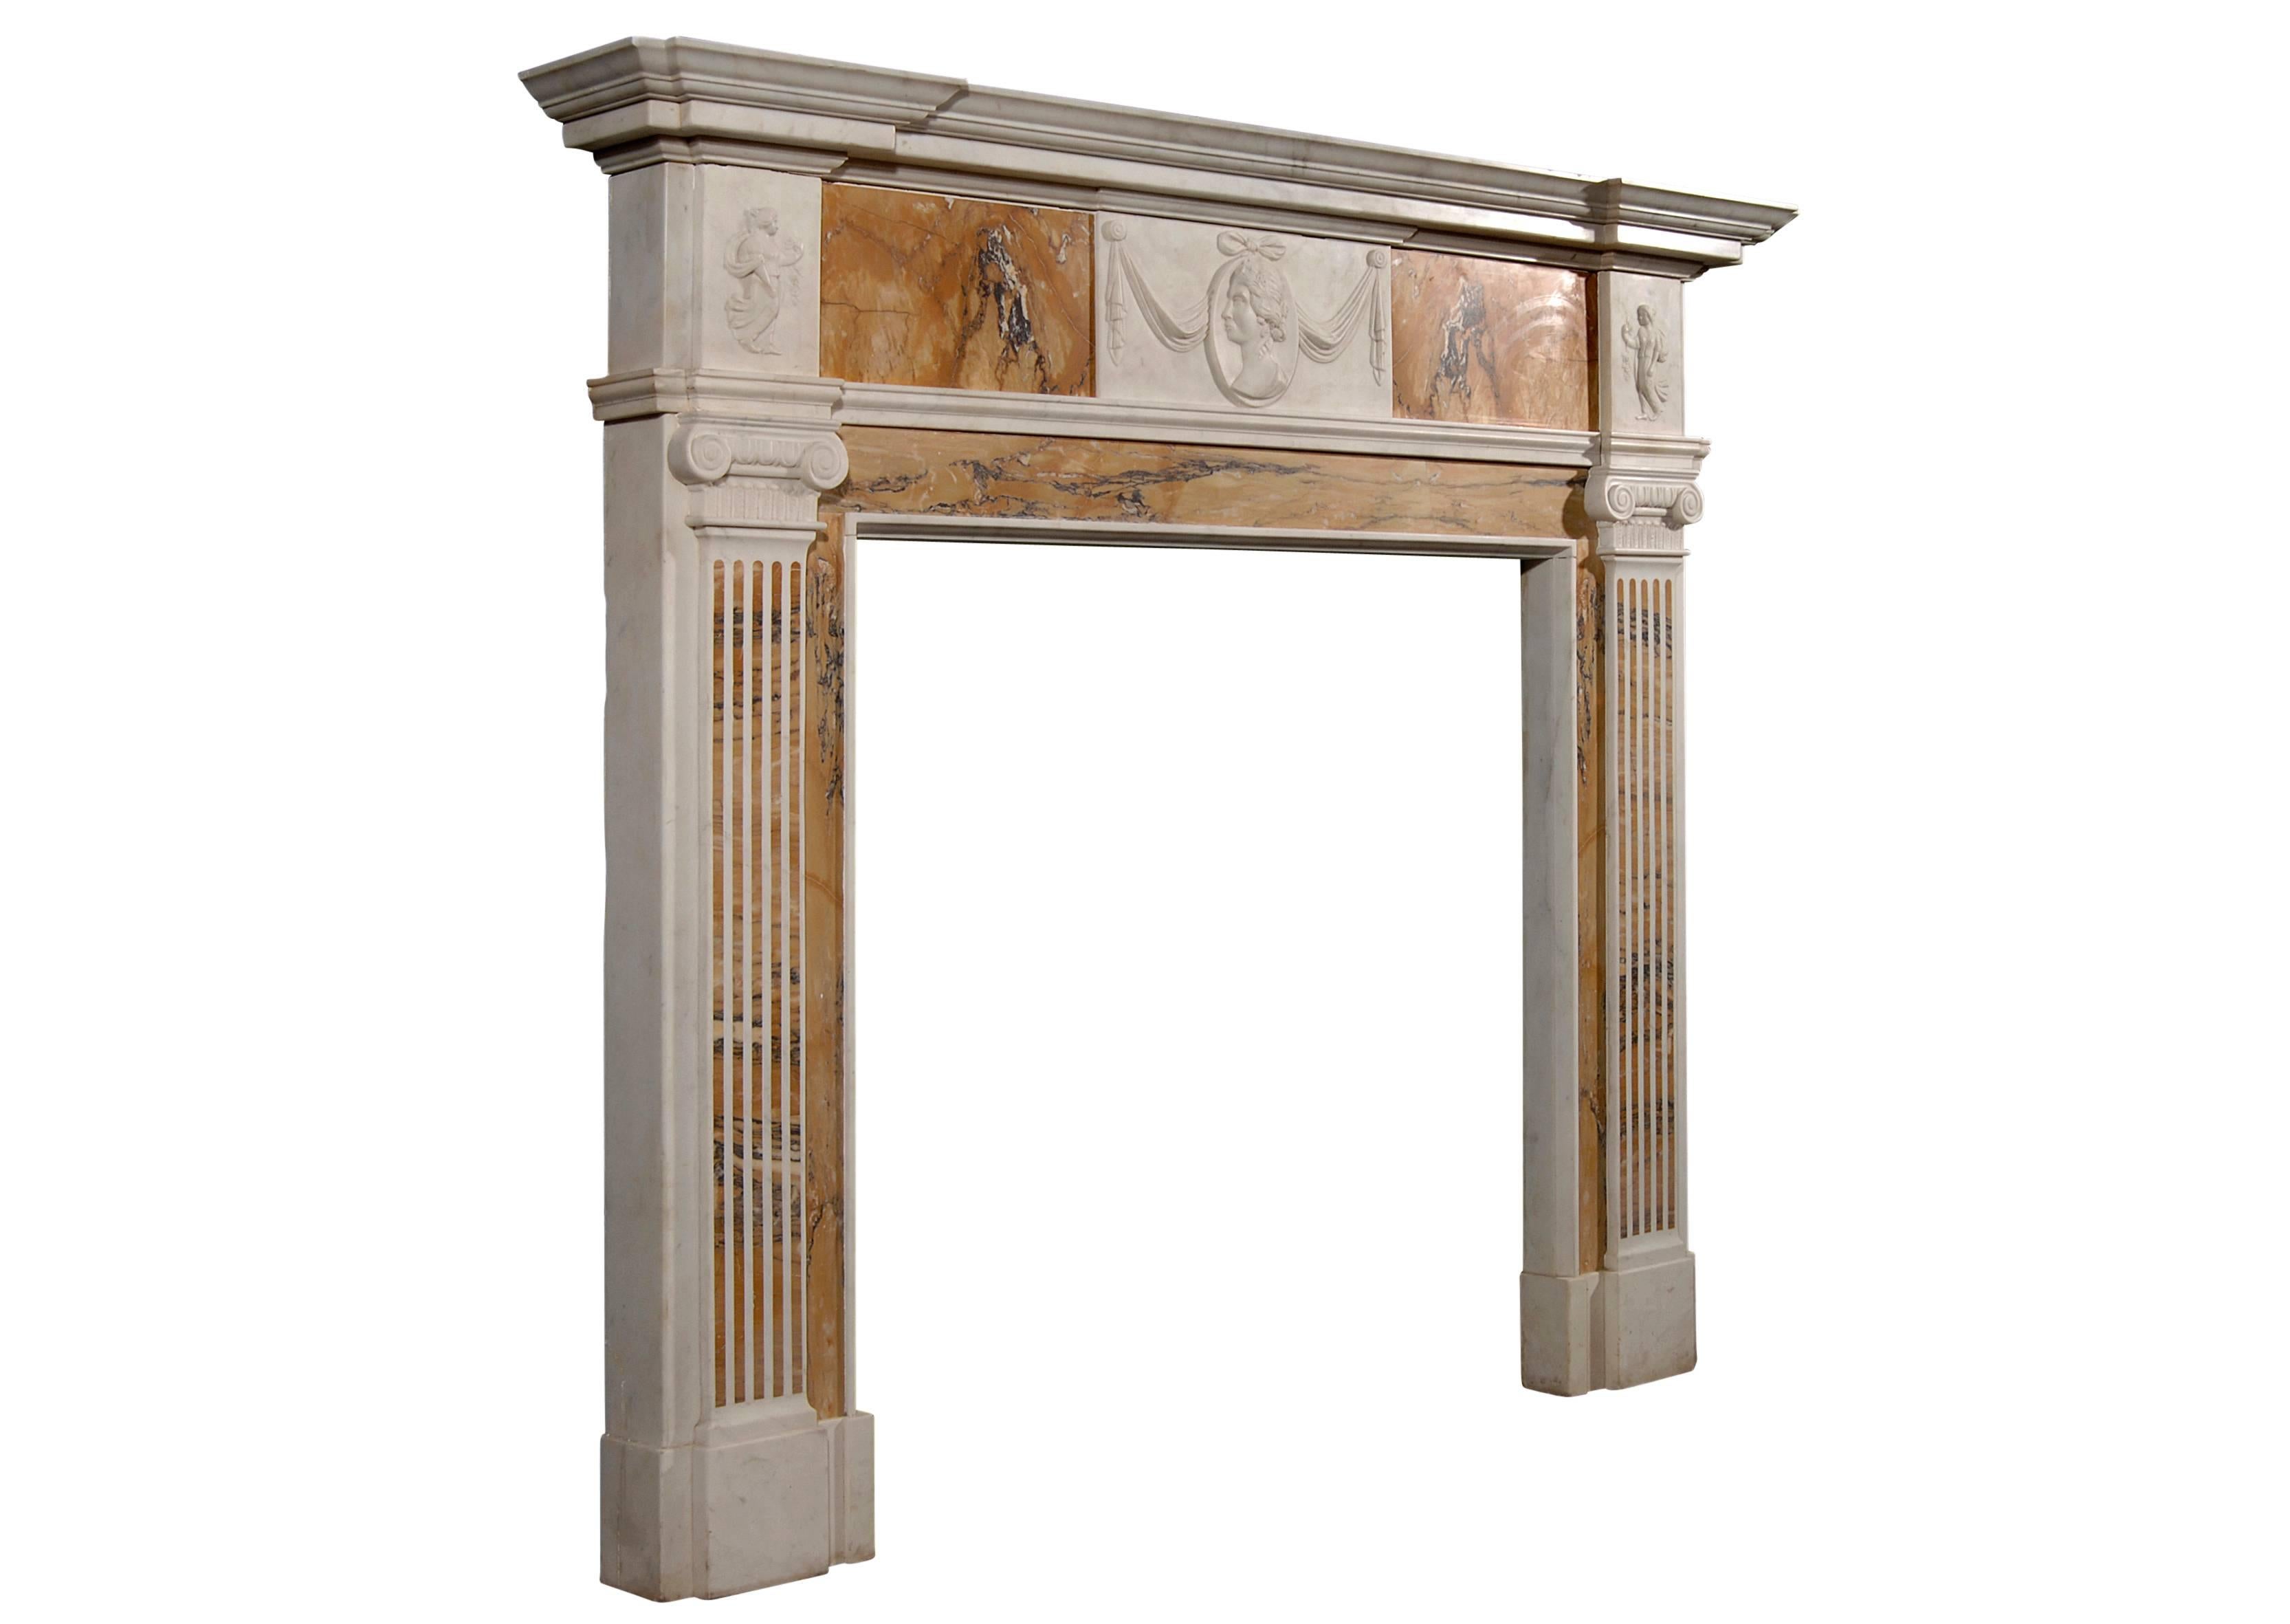 An English George III style Statuary and inlaid Sienna fireplace with center carving of drapery and female mask, putti to side blockings, and fluted jambs surmounted by Ionic capitals. Breakfront moulded shelf.

Shelf Width:	1765 mm      	69 1/2